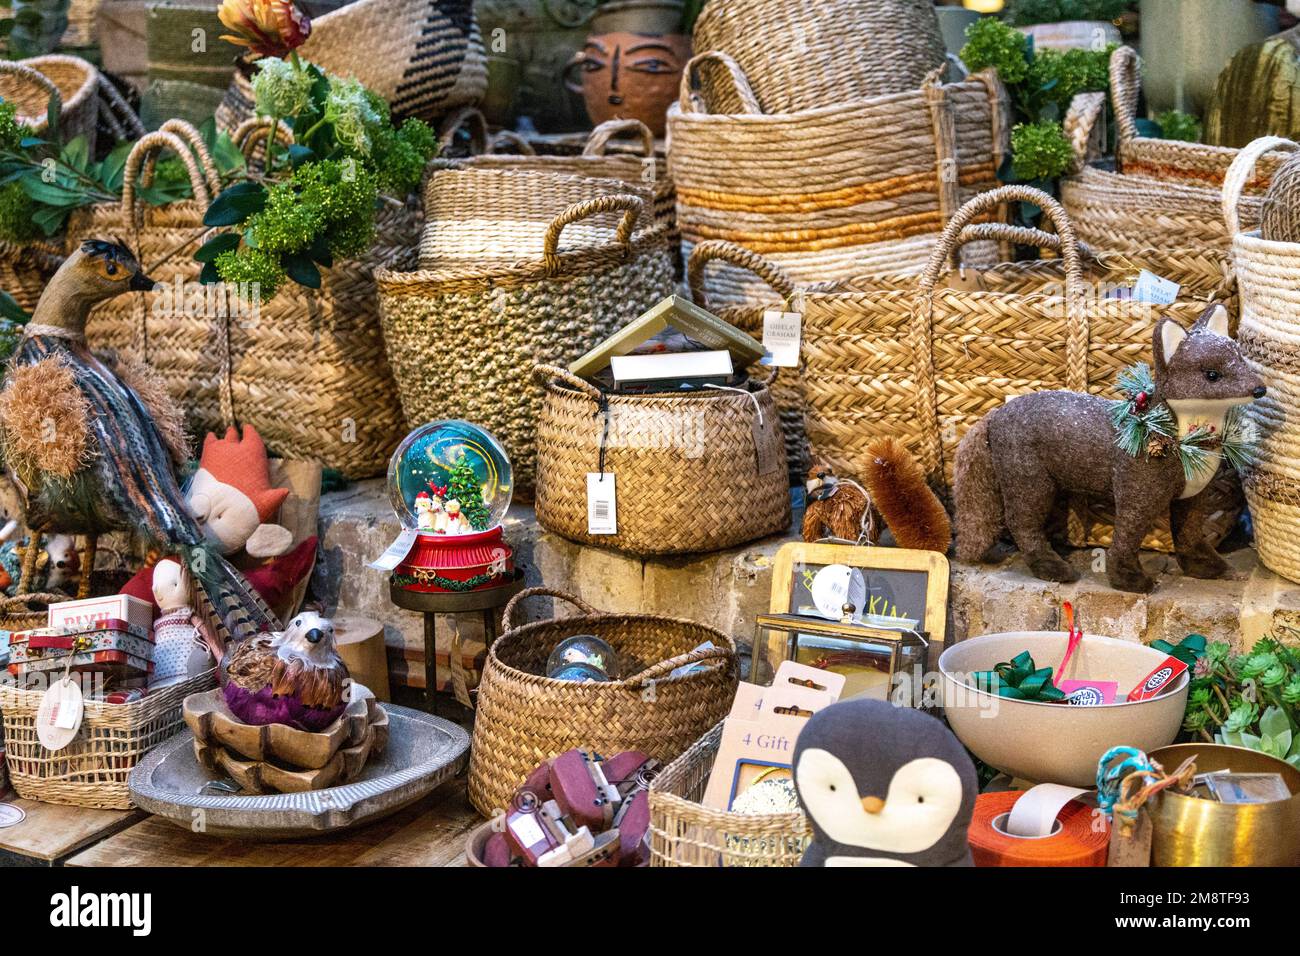 Display of homeware, jute and wicker baskets at After Noah homeware, furniture vintage and toy shop, Angel, Islington, London, UK Stock Photo